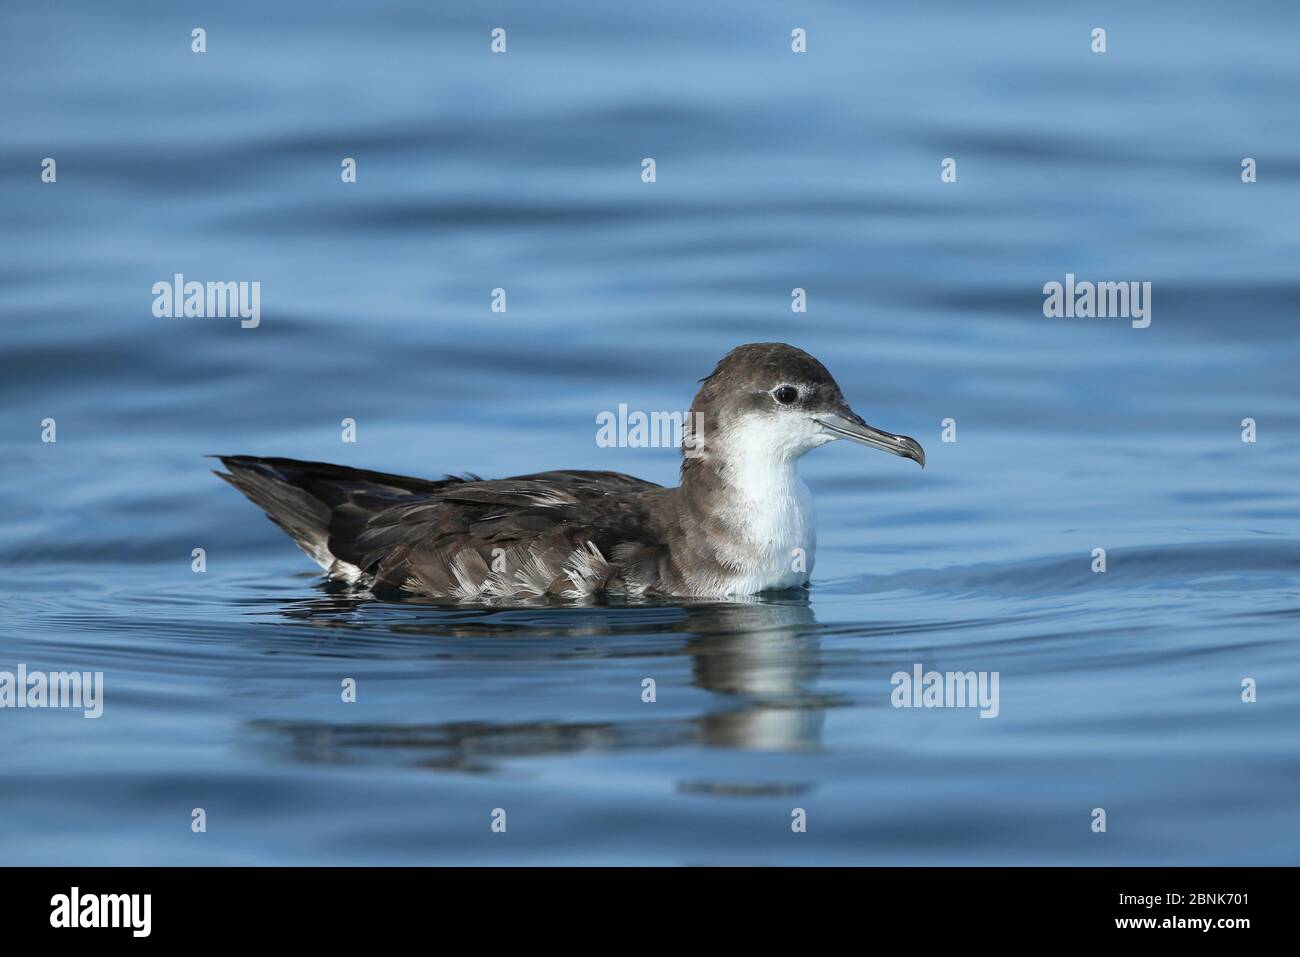 Persian shearwater (Puffinus persicus) on the water, Oman, November Stock Photo